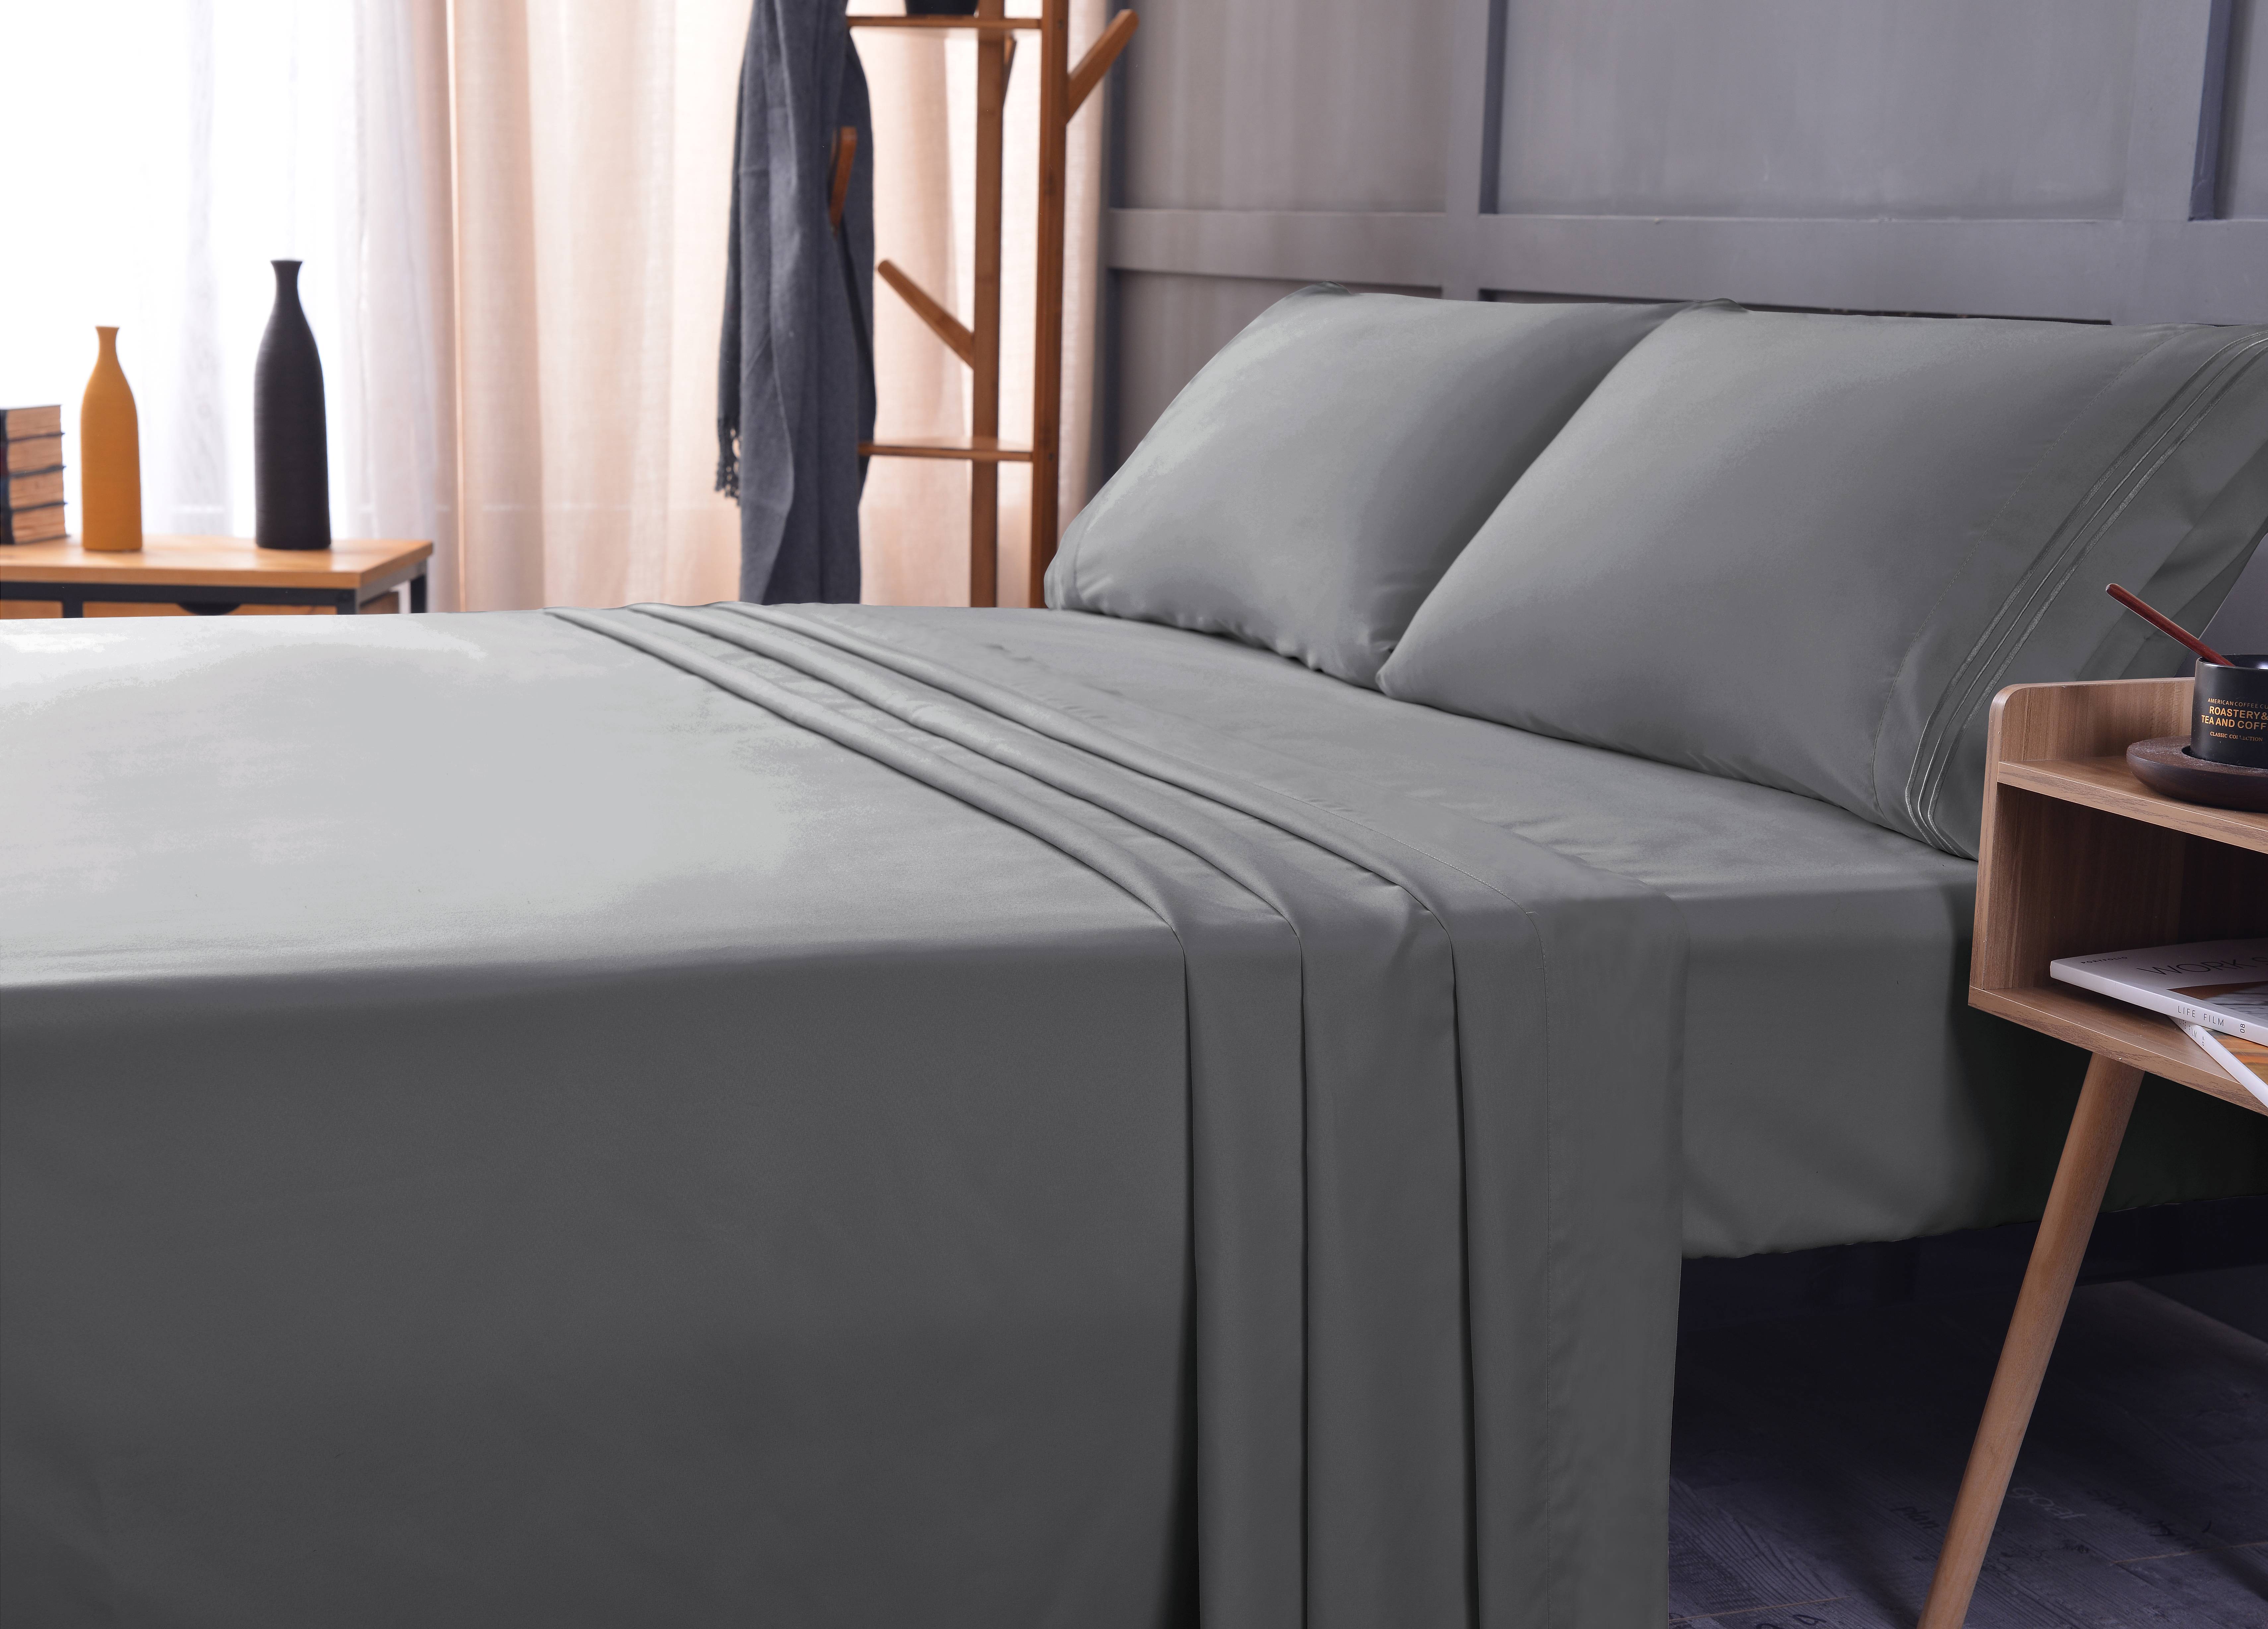 Mutlu Home Goods Rayon Made From Bamboo Sheets Set, Queen Gray Sheets -Deep Pockets-Available in Queen,King,Full,California King,Twin,Twin XL-Wrinkle Free-Ultrasoft-4 Pieces, Queen Size, Gray - image 5 of 5